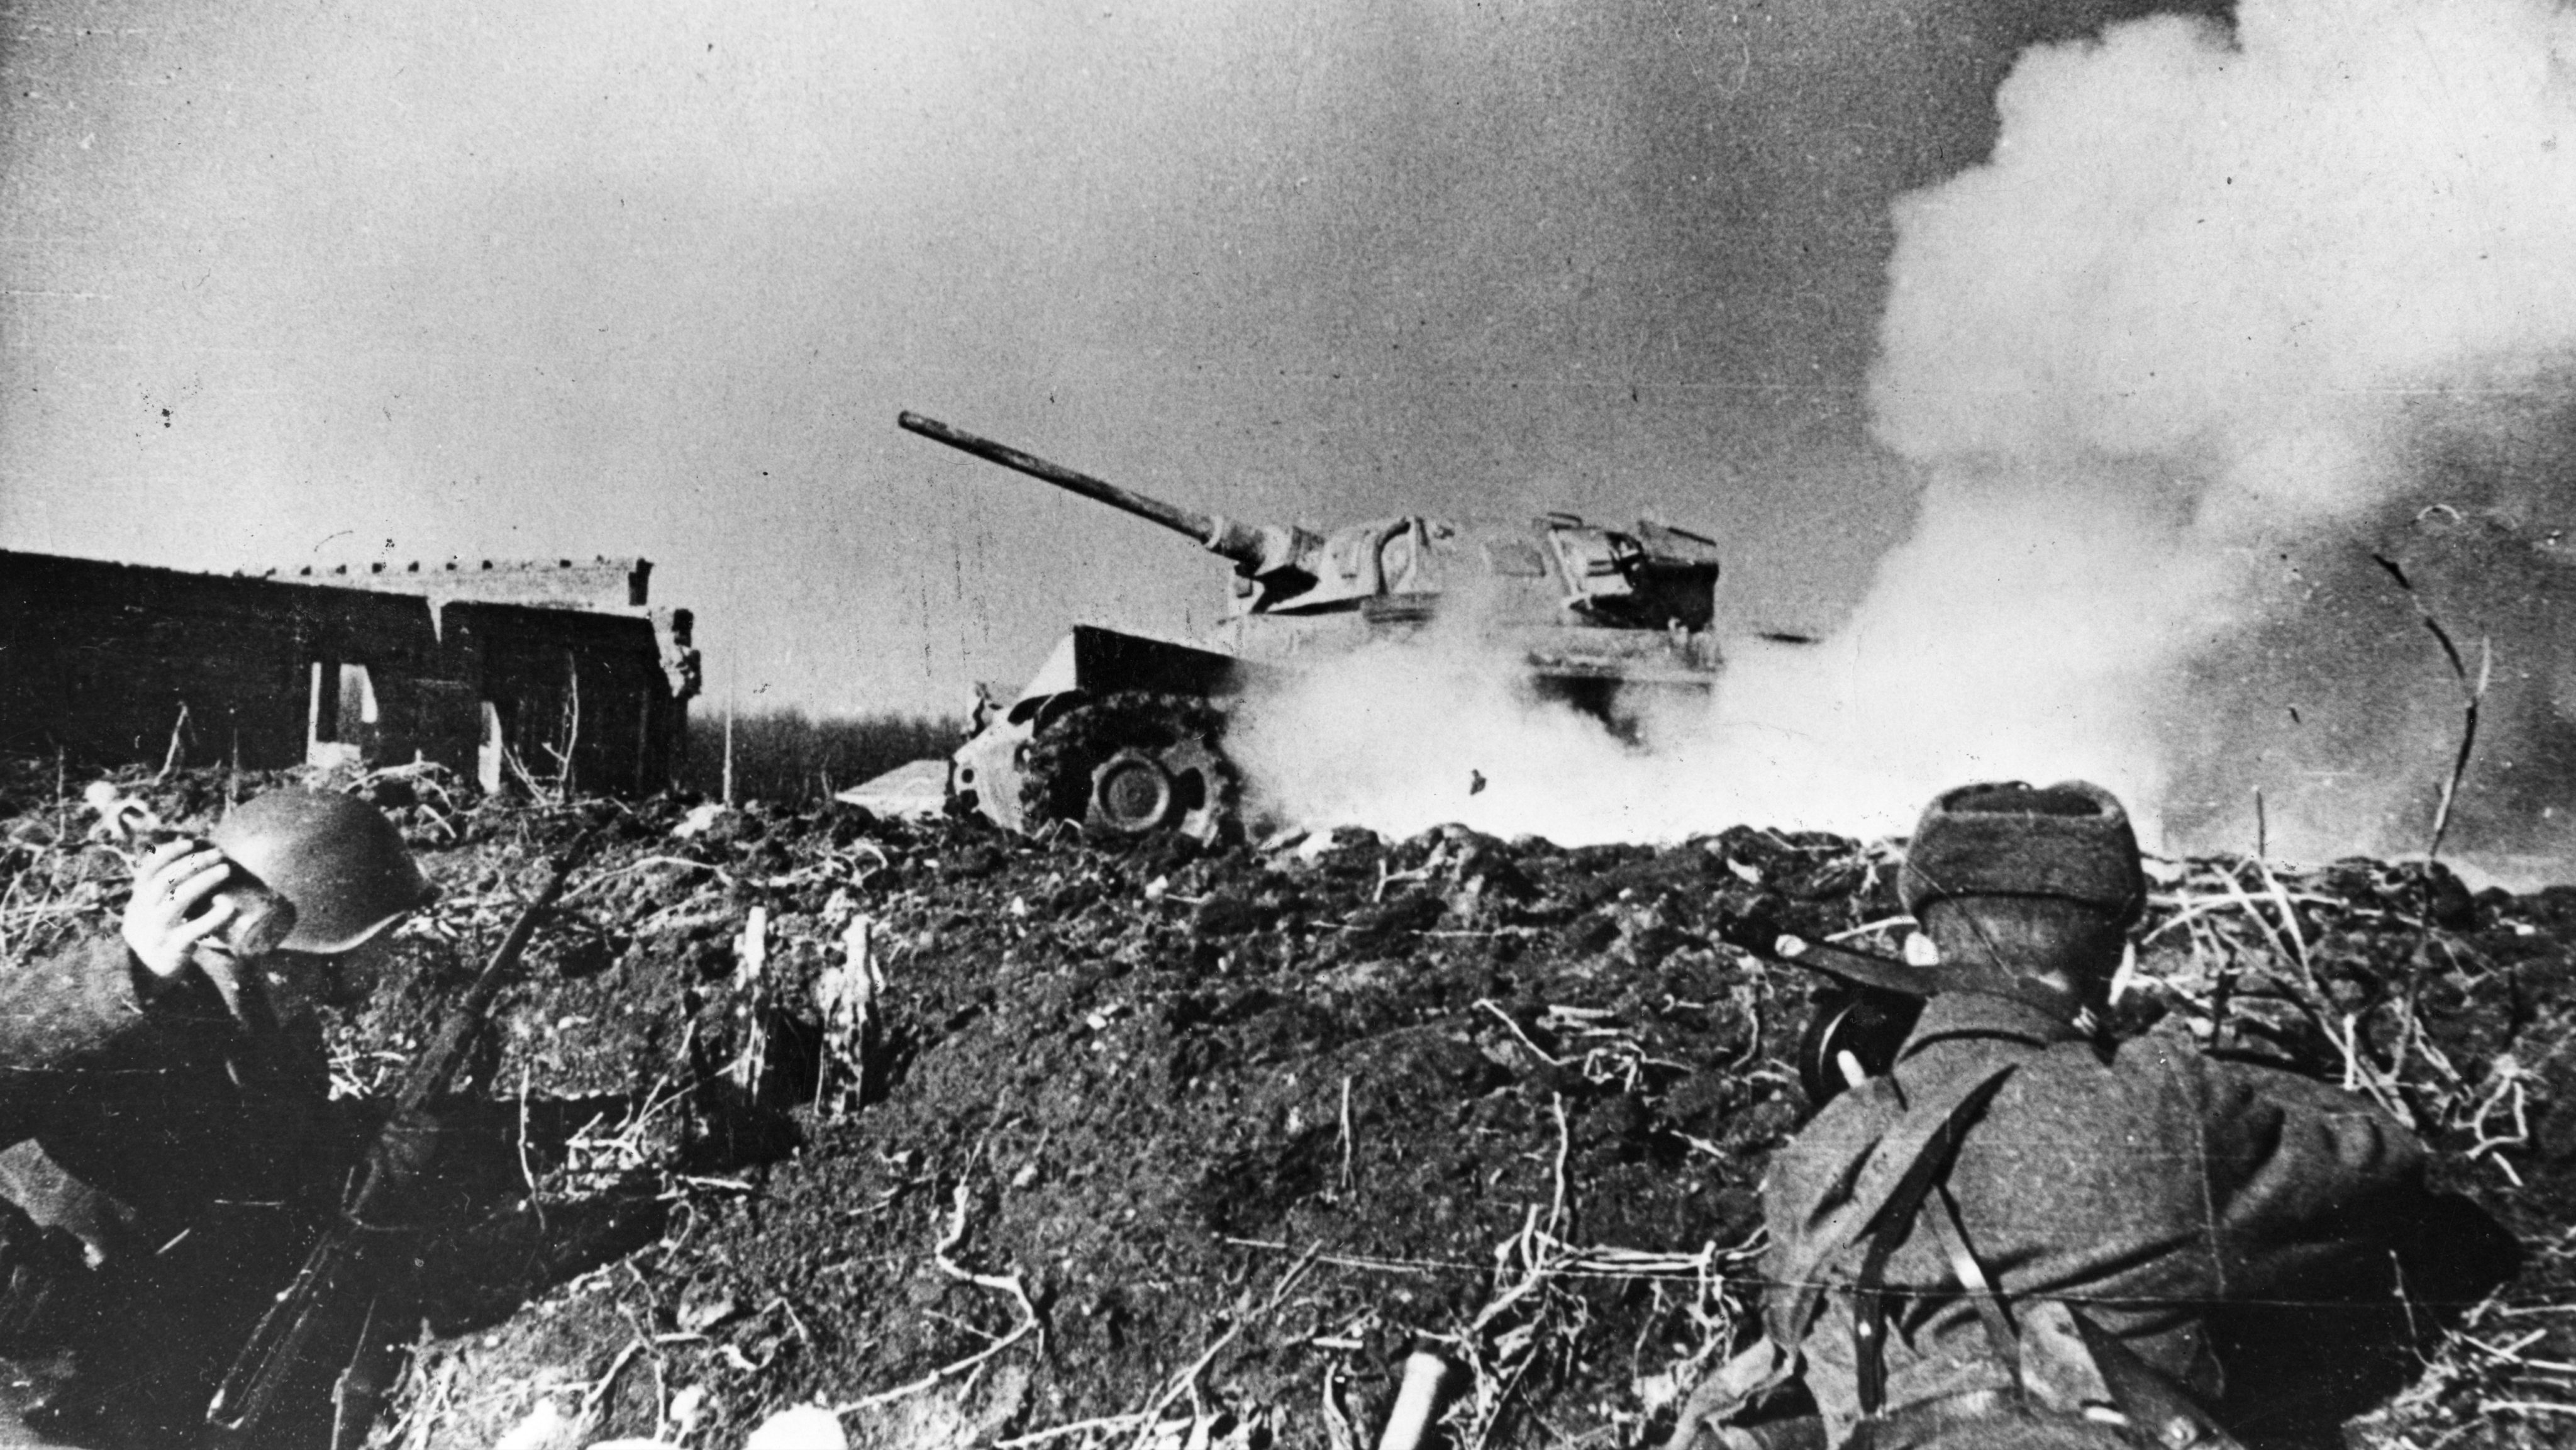 World War 2. Smoke pouring from a German tank hit by a Molotov Cocktail